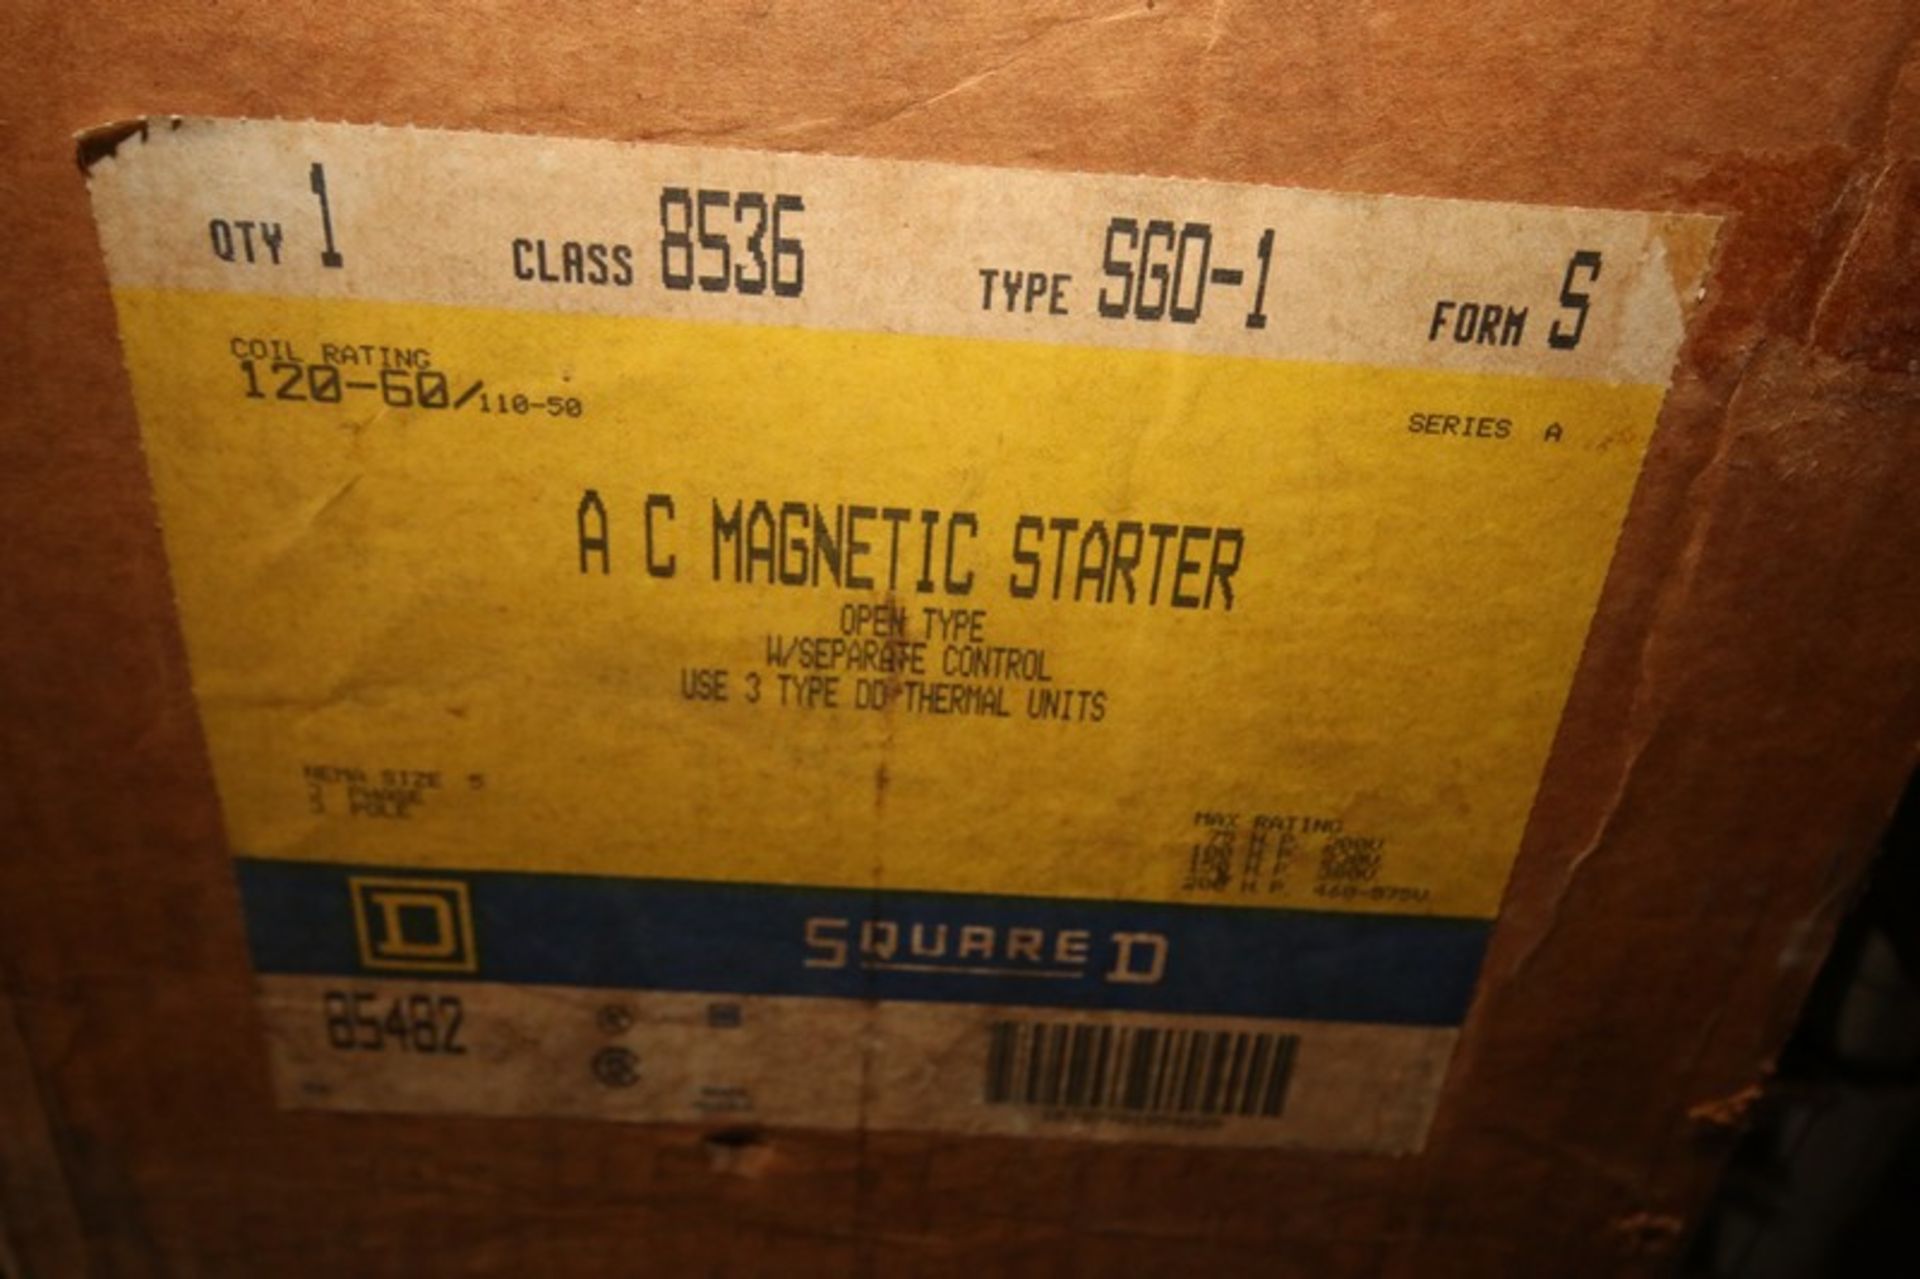 NIB Square D Size 5 AC Magnetic Starter, Class 8536, Type S60-1, Form S (INV#78008)(Located @ the - Image 2 of 2